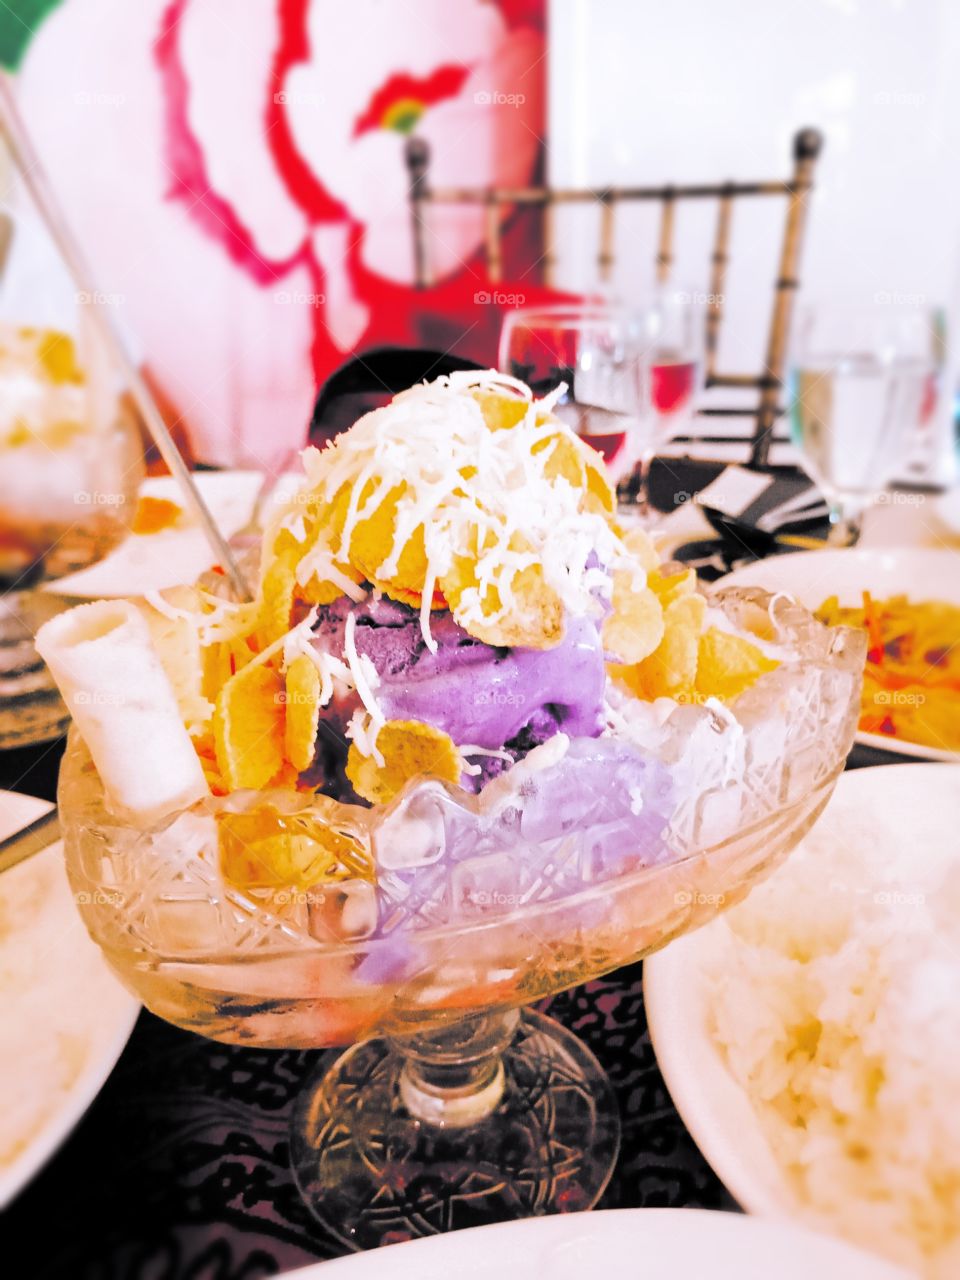 Beat the heat with Halo-halo Supreme!🍨

It's summer time in the Philippines. This for sure is heaven in a tropical warm weather.🌞
Halo-halo or Haluhalo is a popular Filipino dessert.